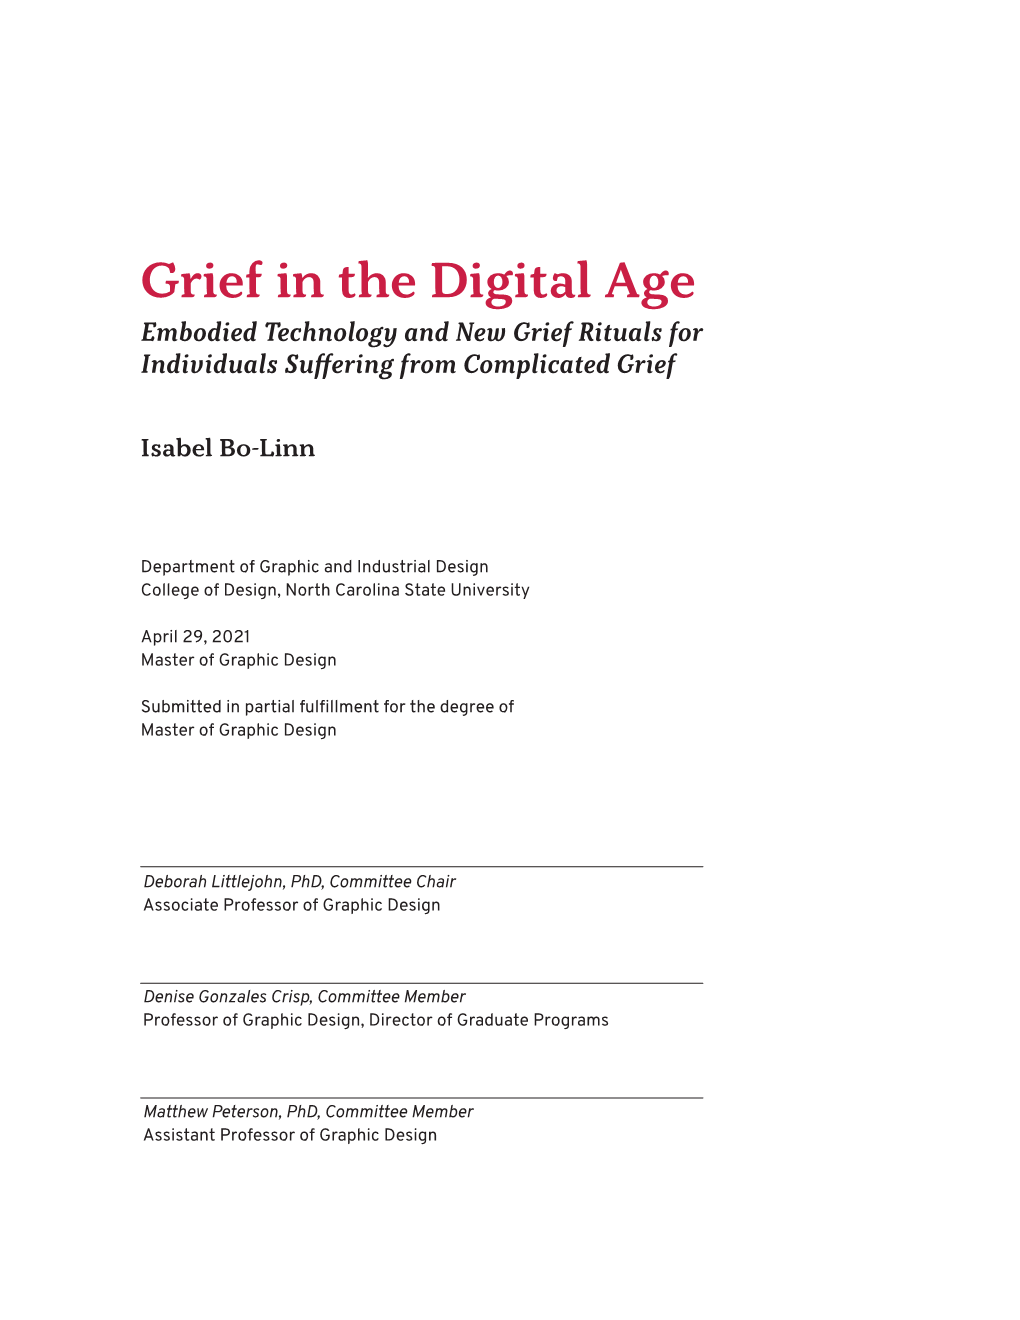 Grief in the Digital Age Embodied Technology and New Grief Rituals for Individuals Suffering from Complicated Grief